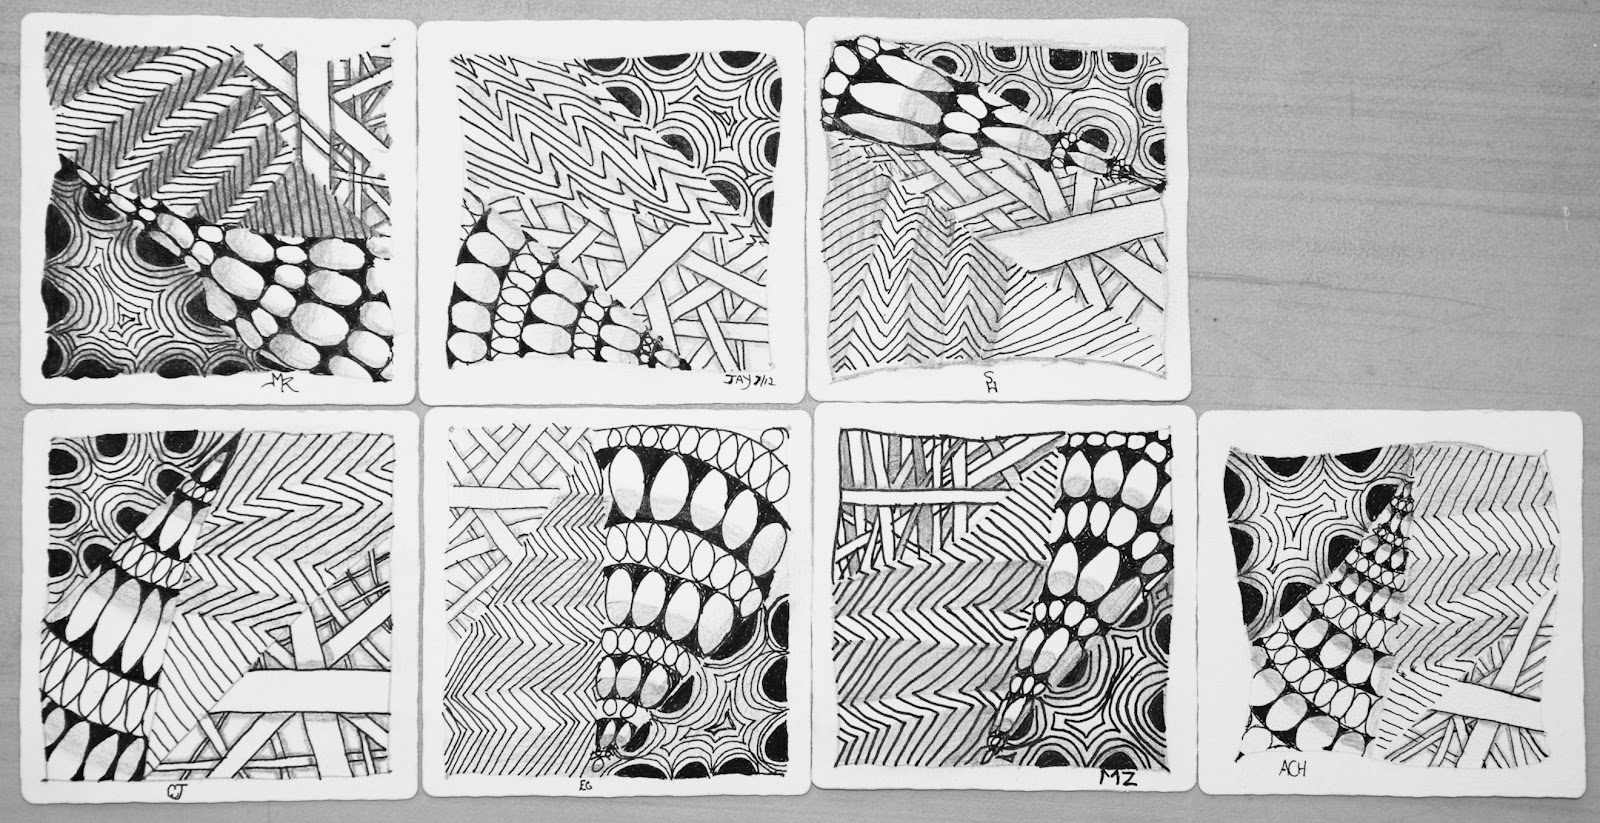 Introduction to the Zentangle Drawing Method w/ art-therapist Ann